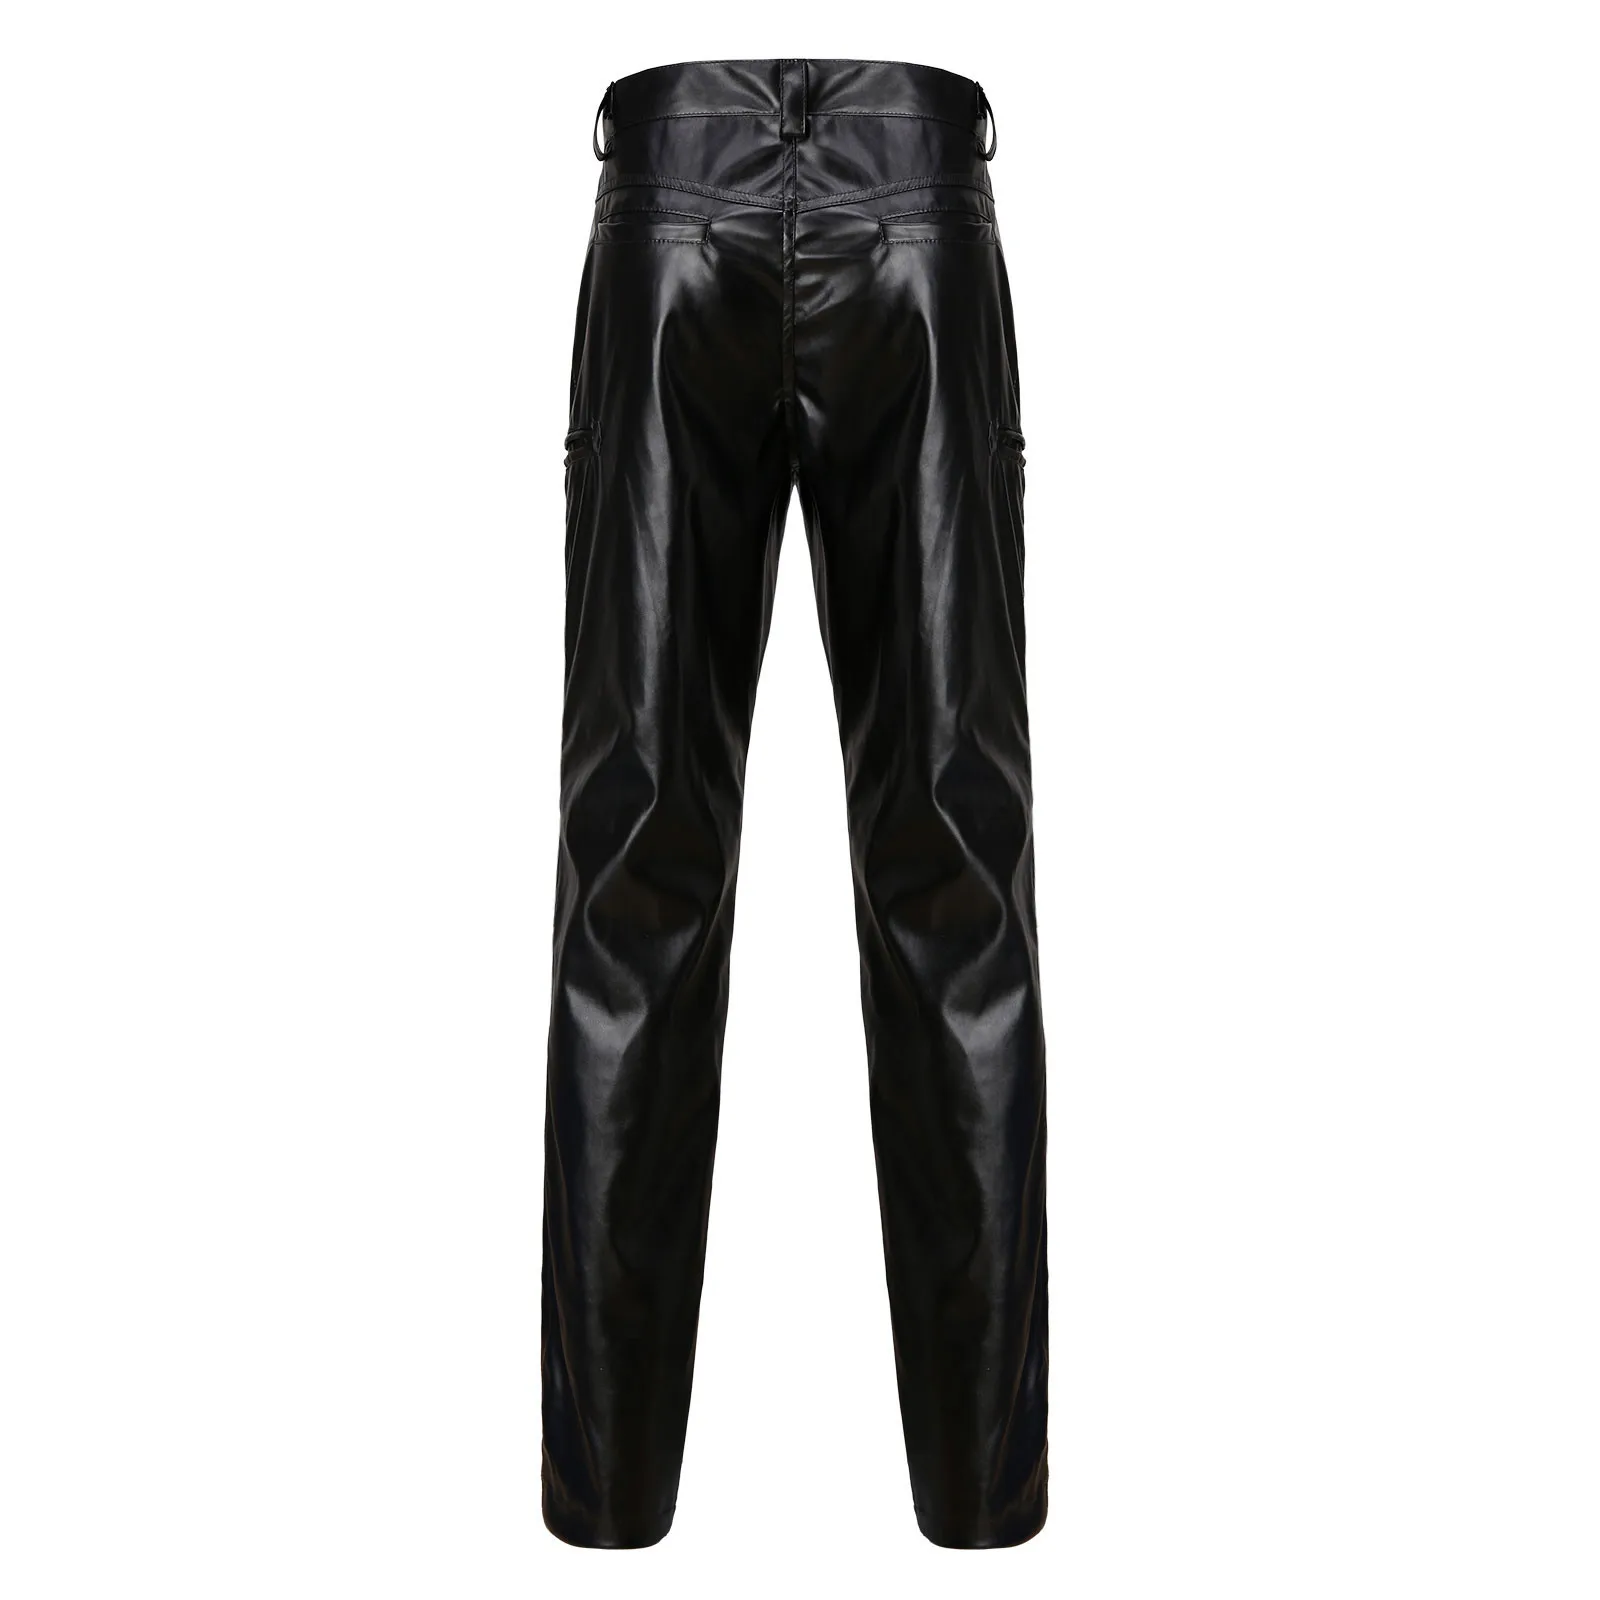 Men's Fashion Casual Pants Large Size Zipper Leather Pants Skinny Leather Pants Streetwear Motorcycle Male Trousers fruit of the loom sweatpants